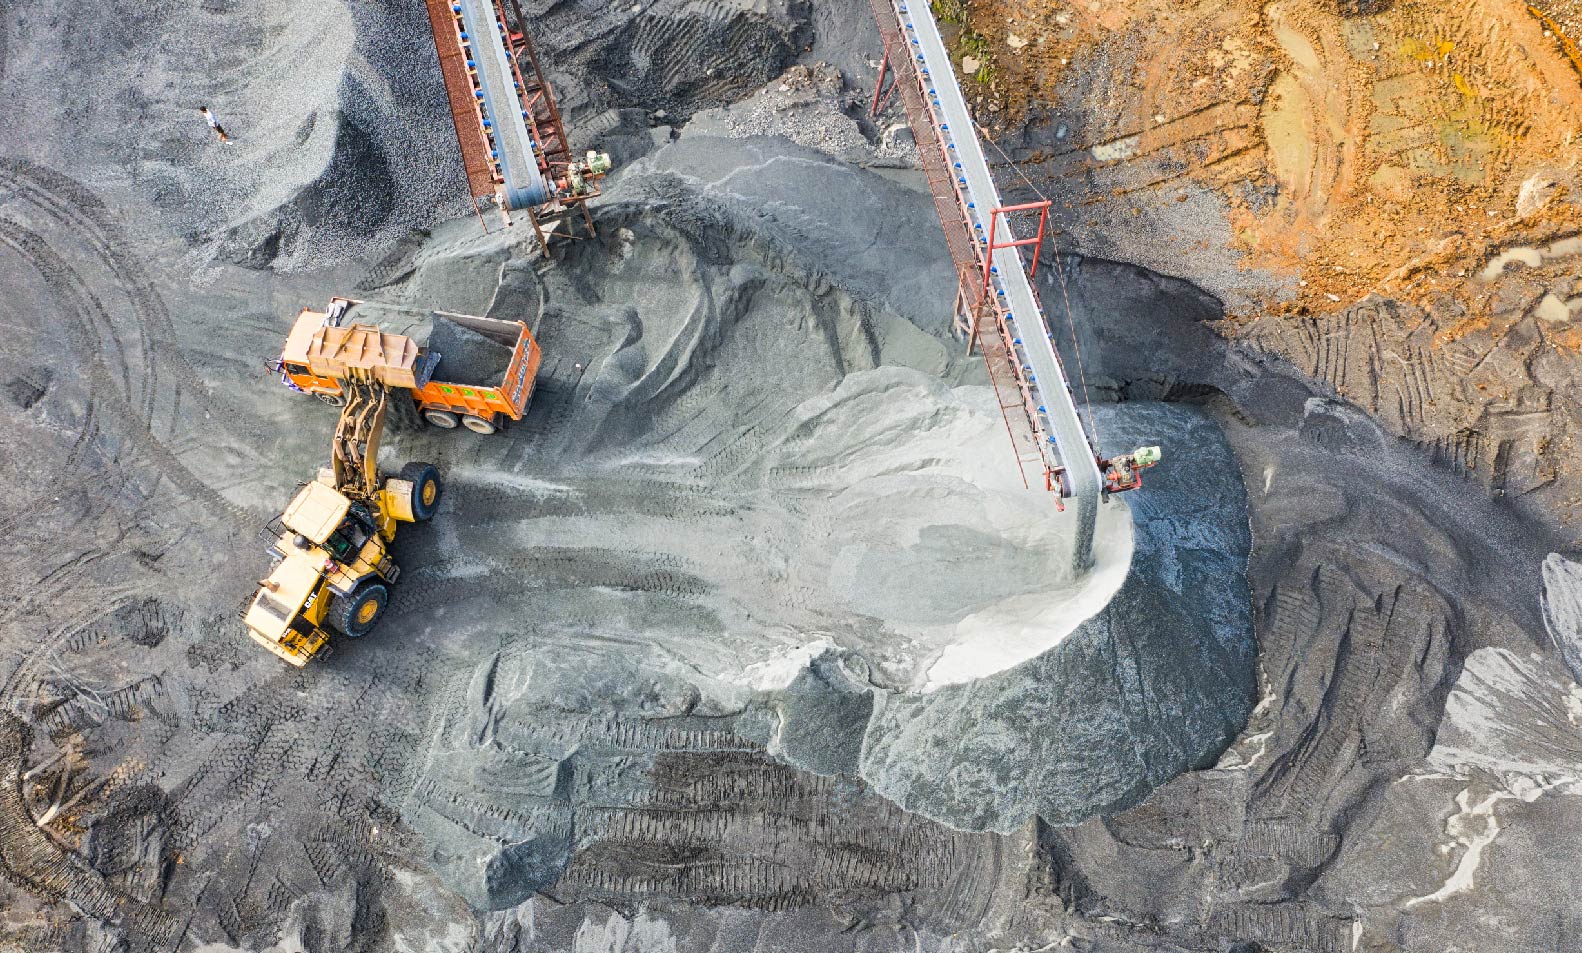 A mining operation is using a conveyor belt to remove rocks and sand .